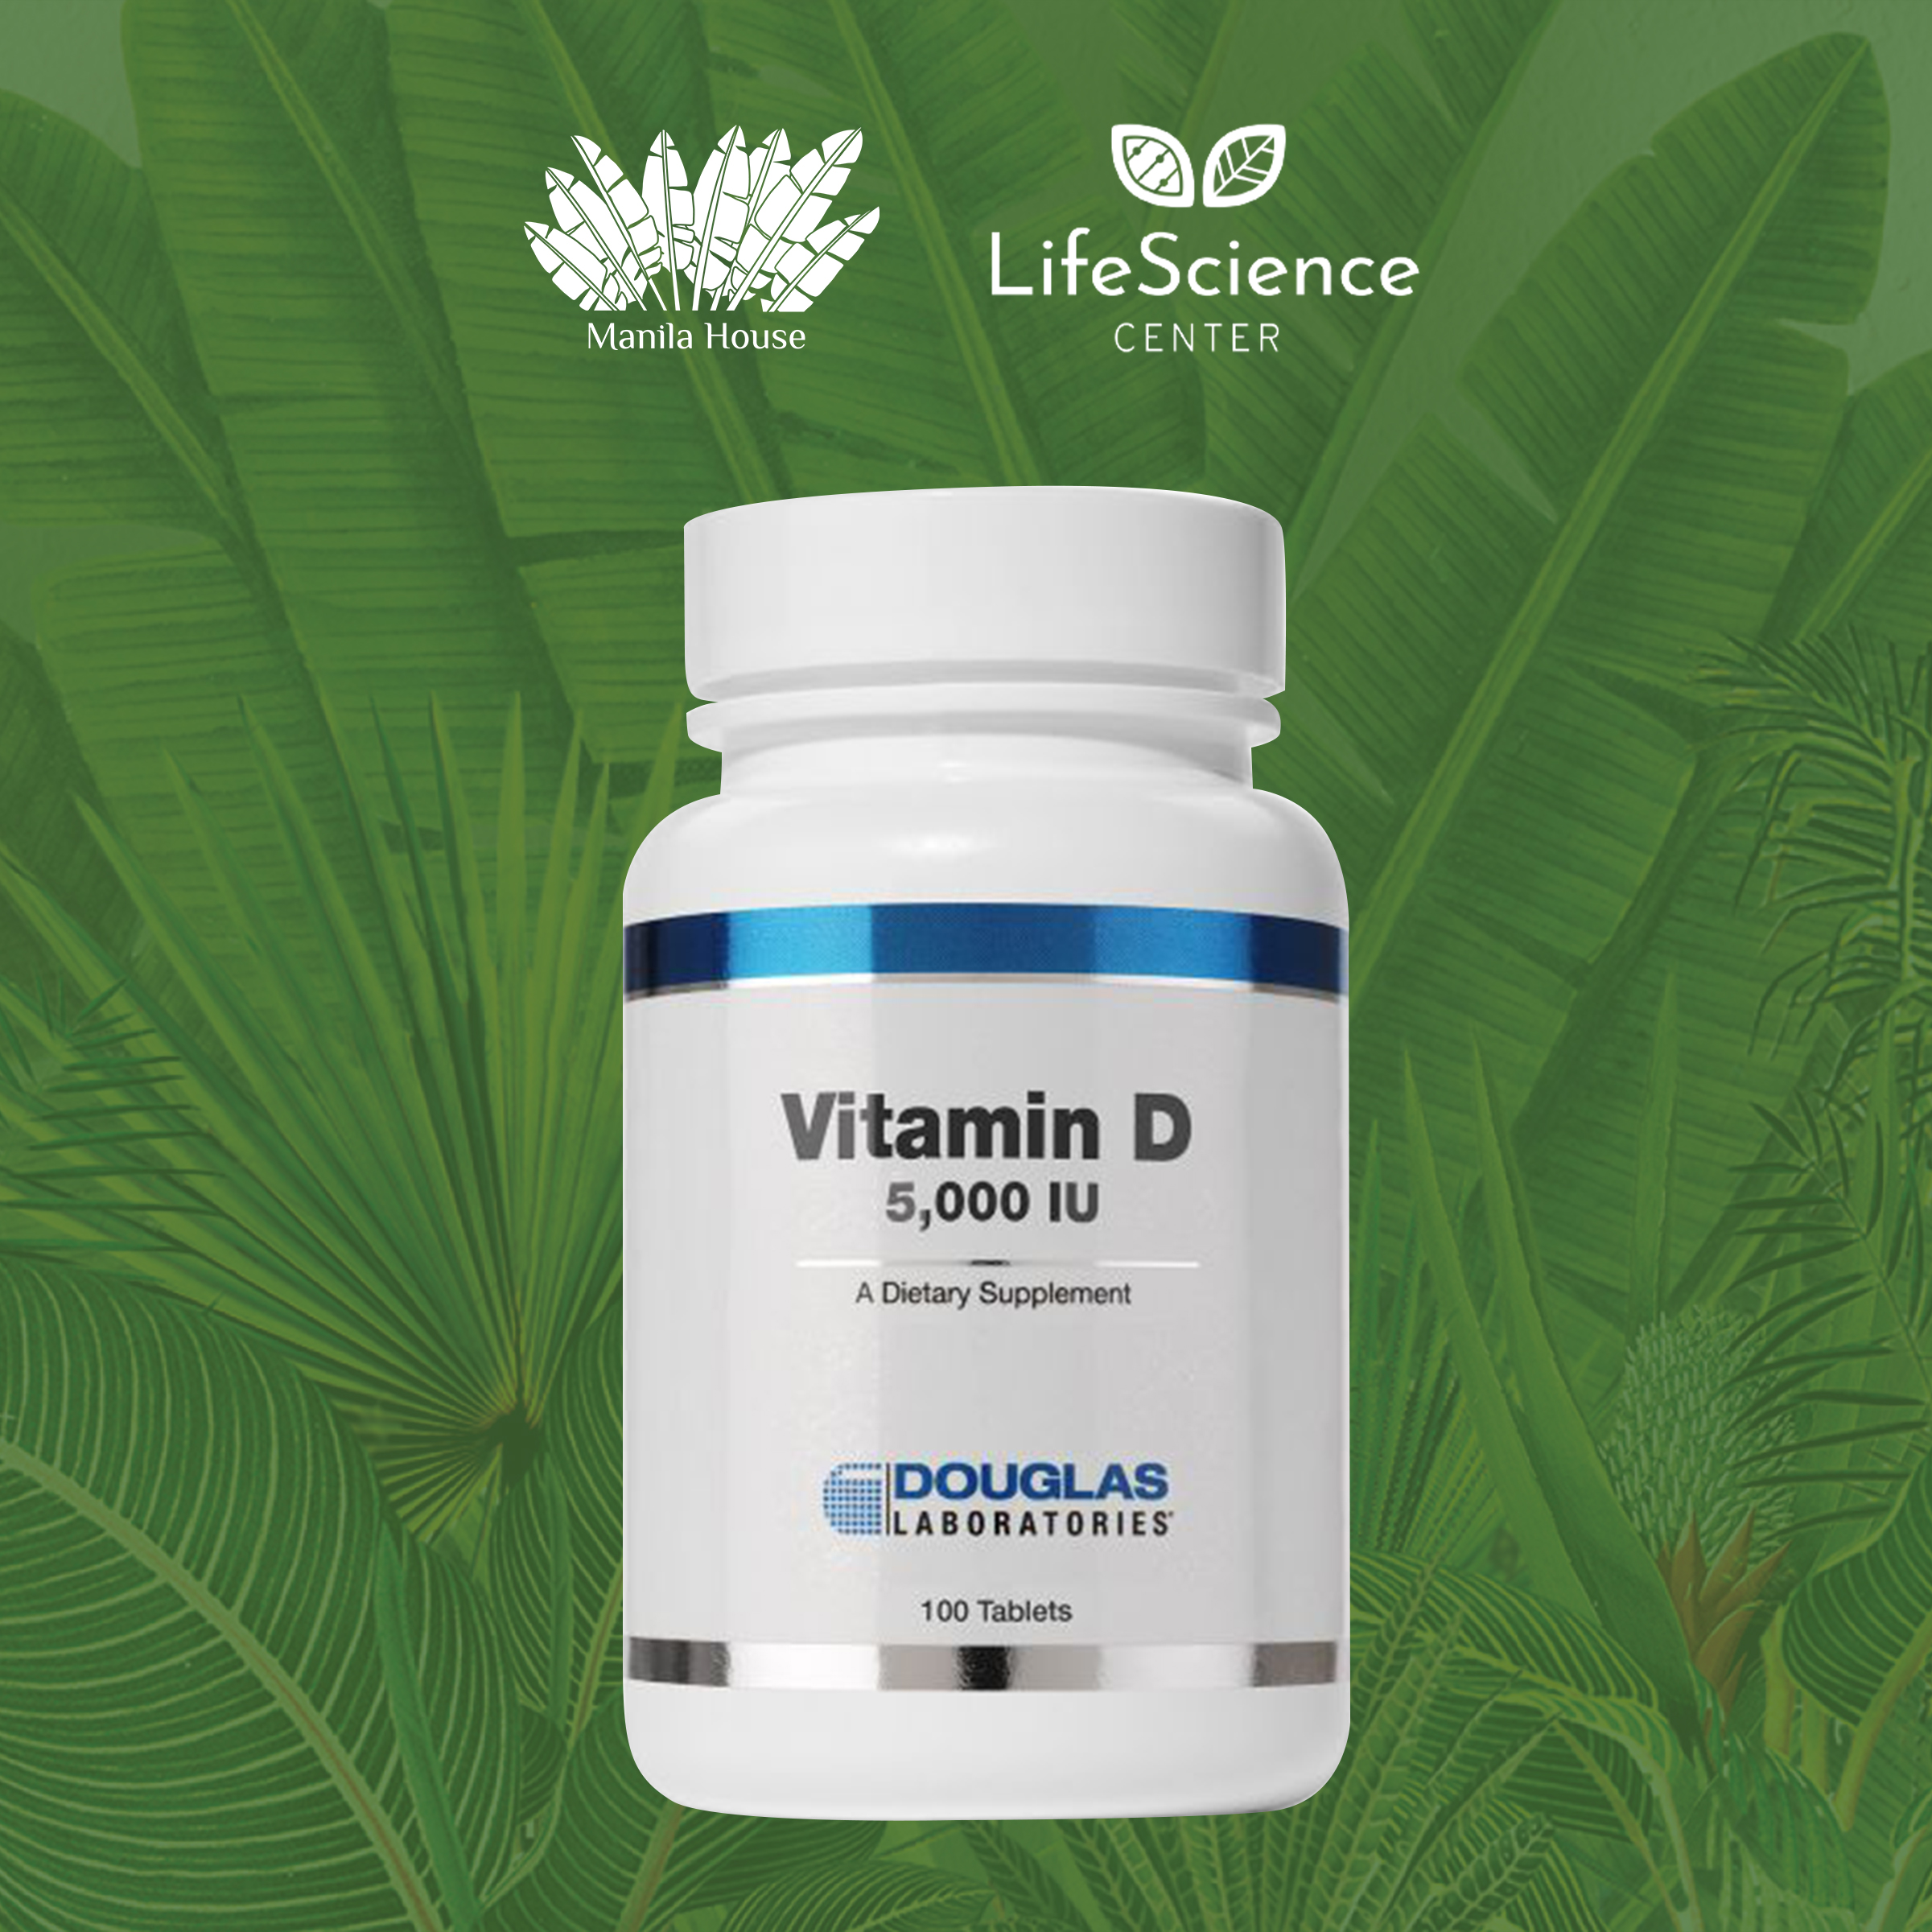 Douglas Laboratories Vitamin D3 5000IU for Sale from the Retail Shop of Manila House Private Club Inc